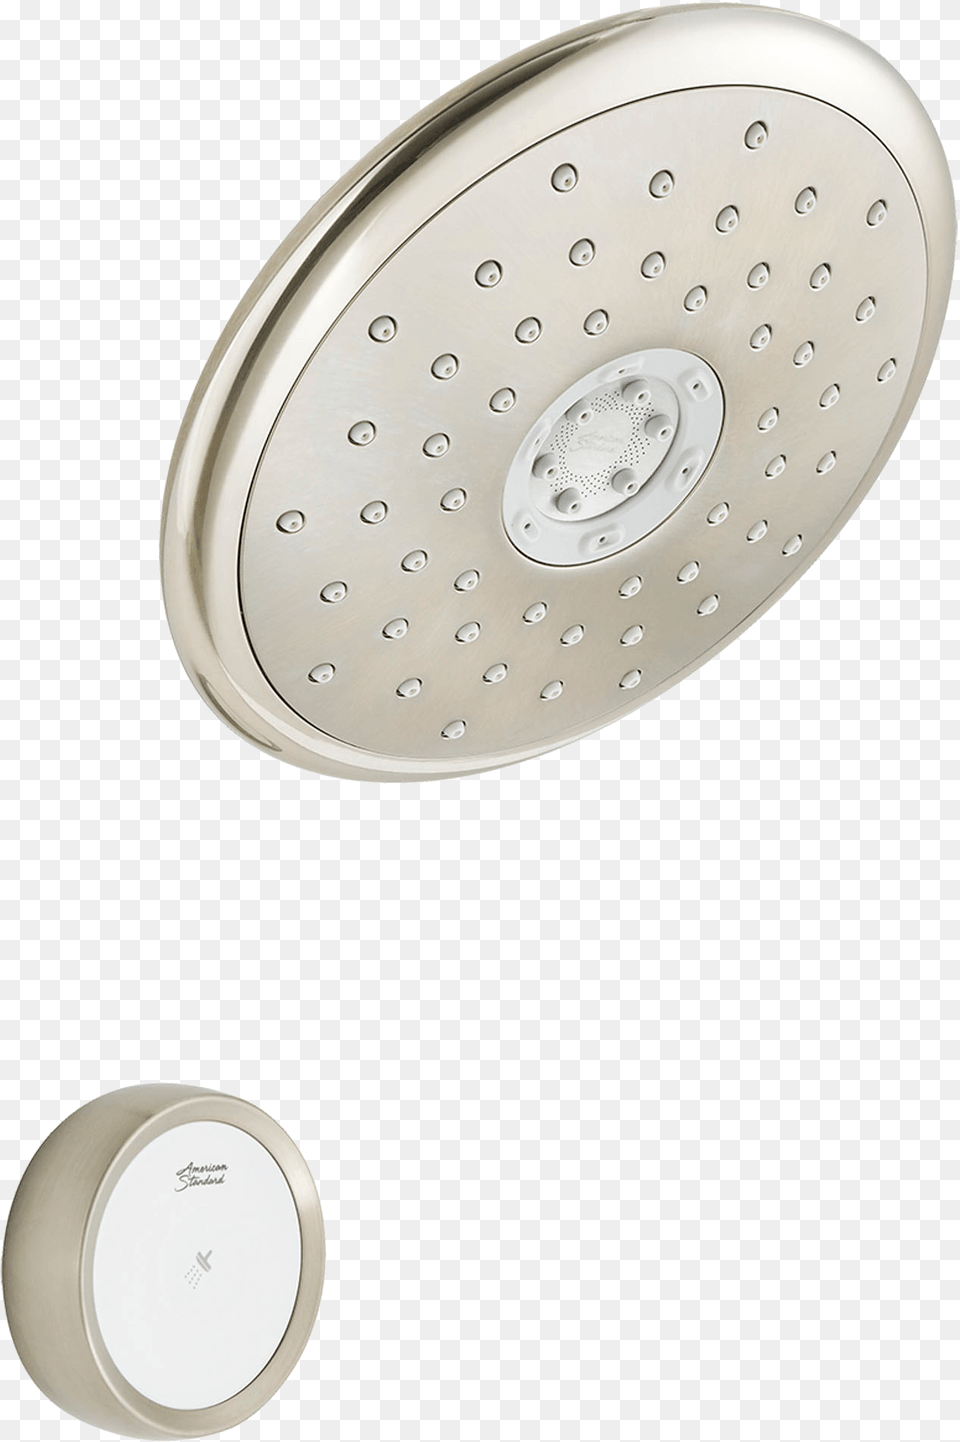 American Standard Spectra Etouch Shower Head, Indoors, Bathroom, Room, Shower Faucet Png